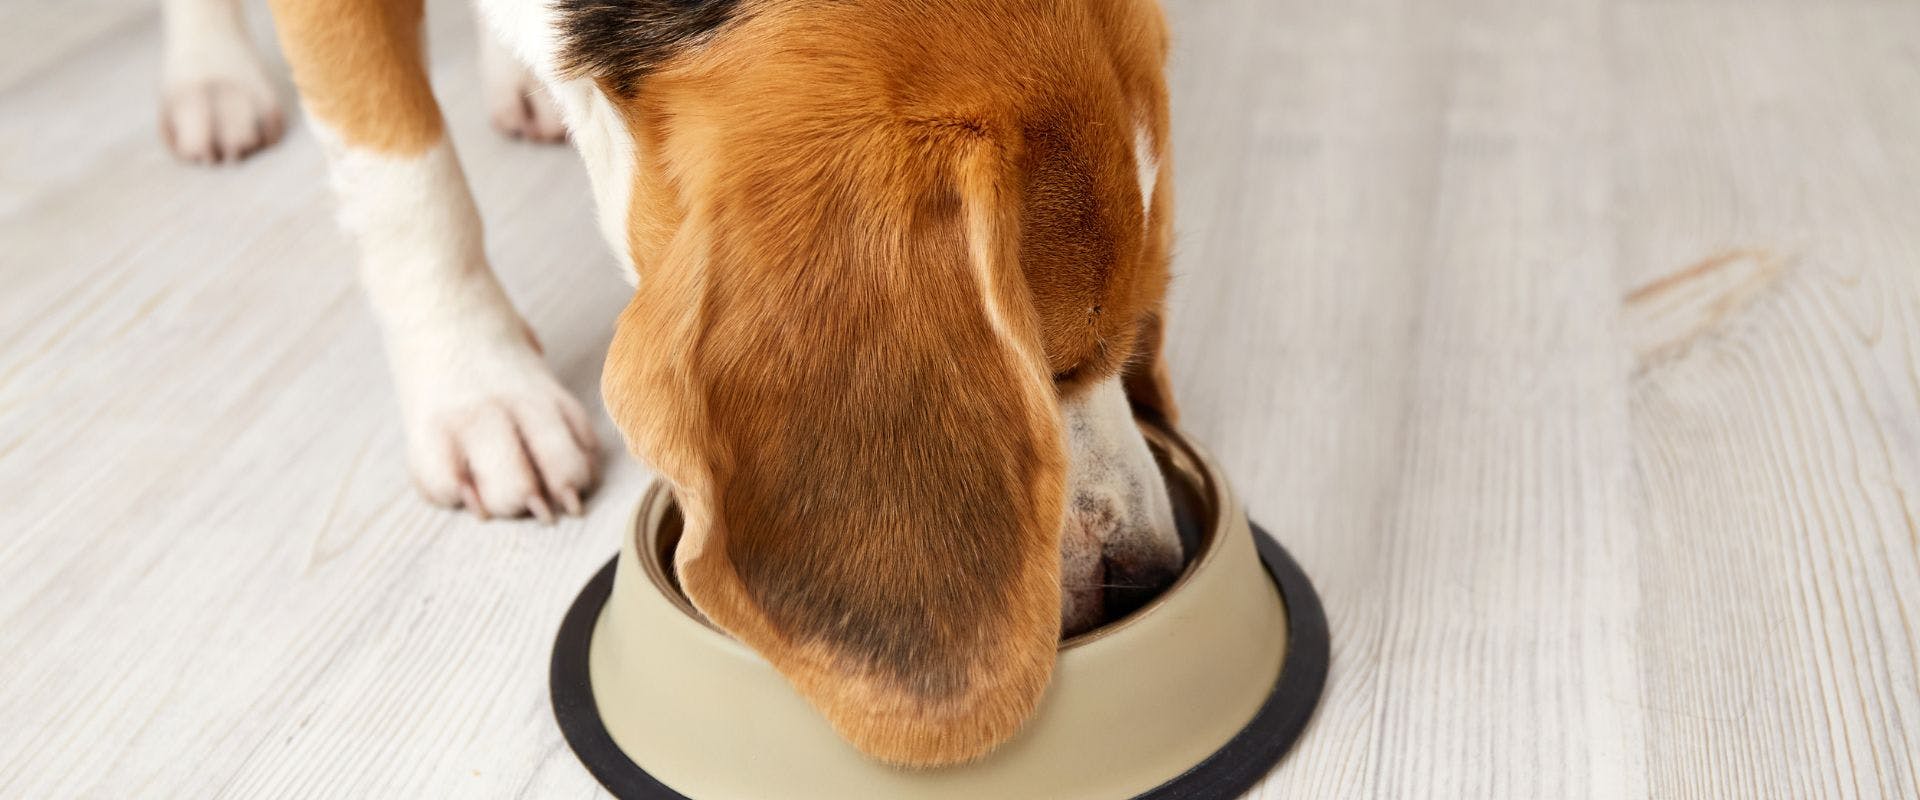 Beagle eating from a bowl